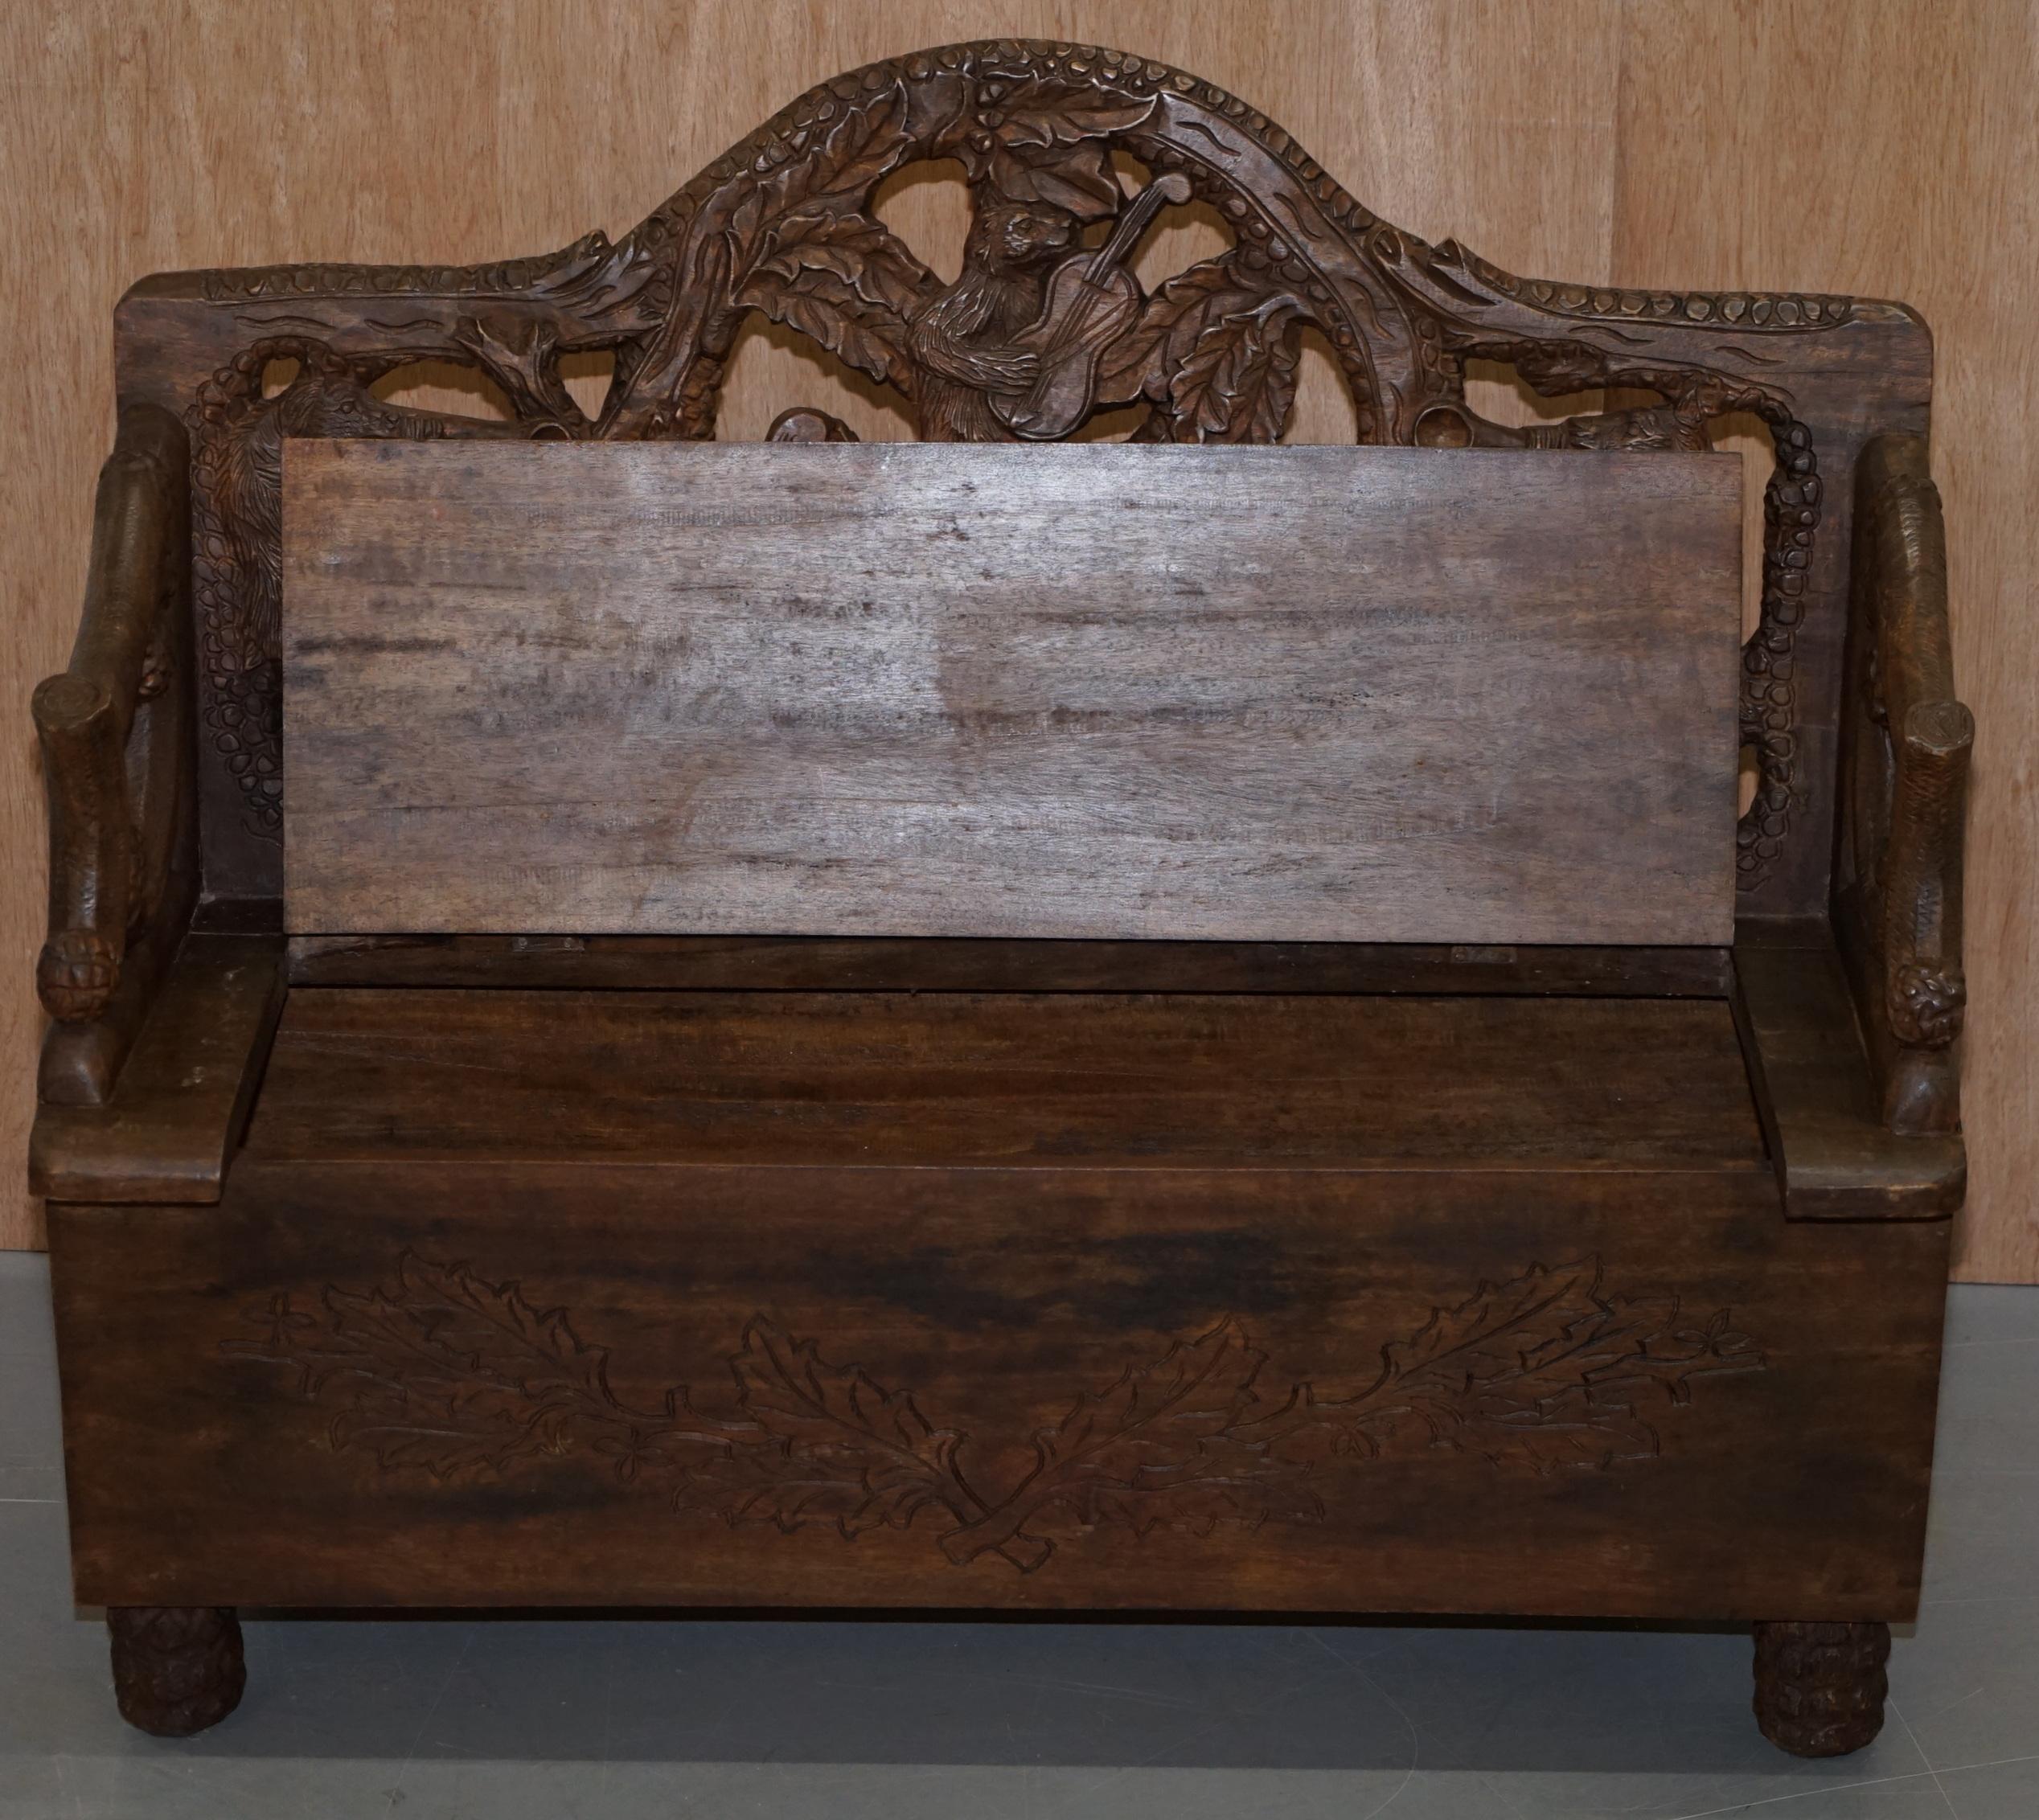 Lovely Vintage Black Forest Wood Bear Bench with Internal Storage Part of Suite 11